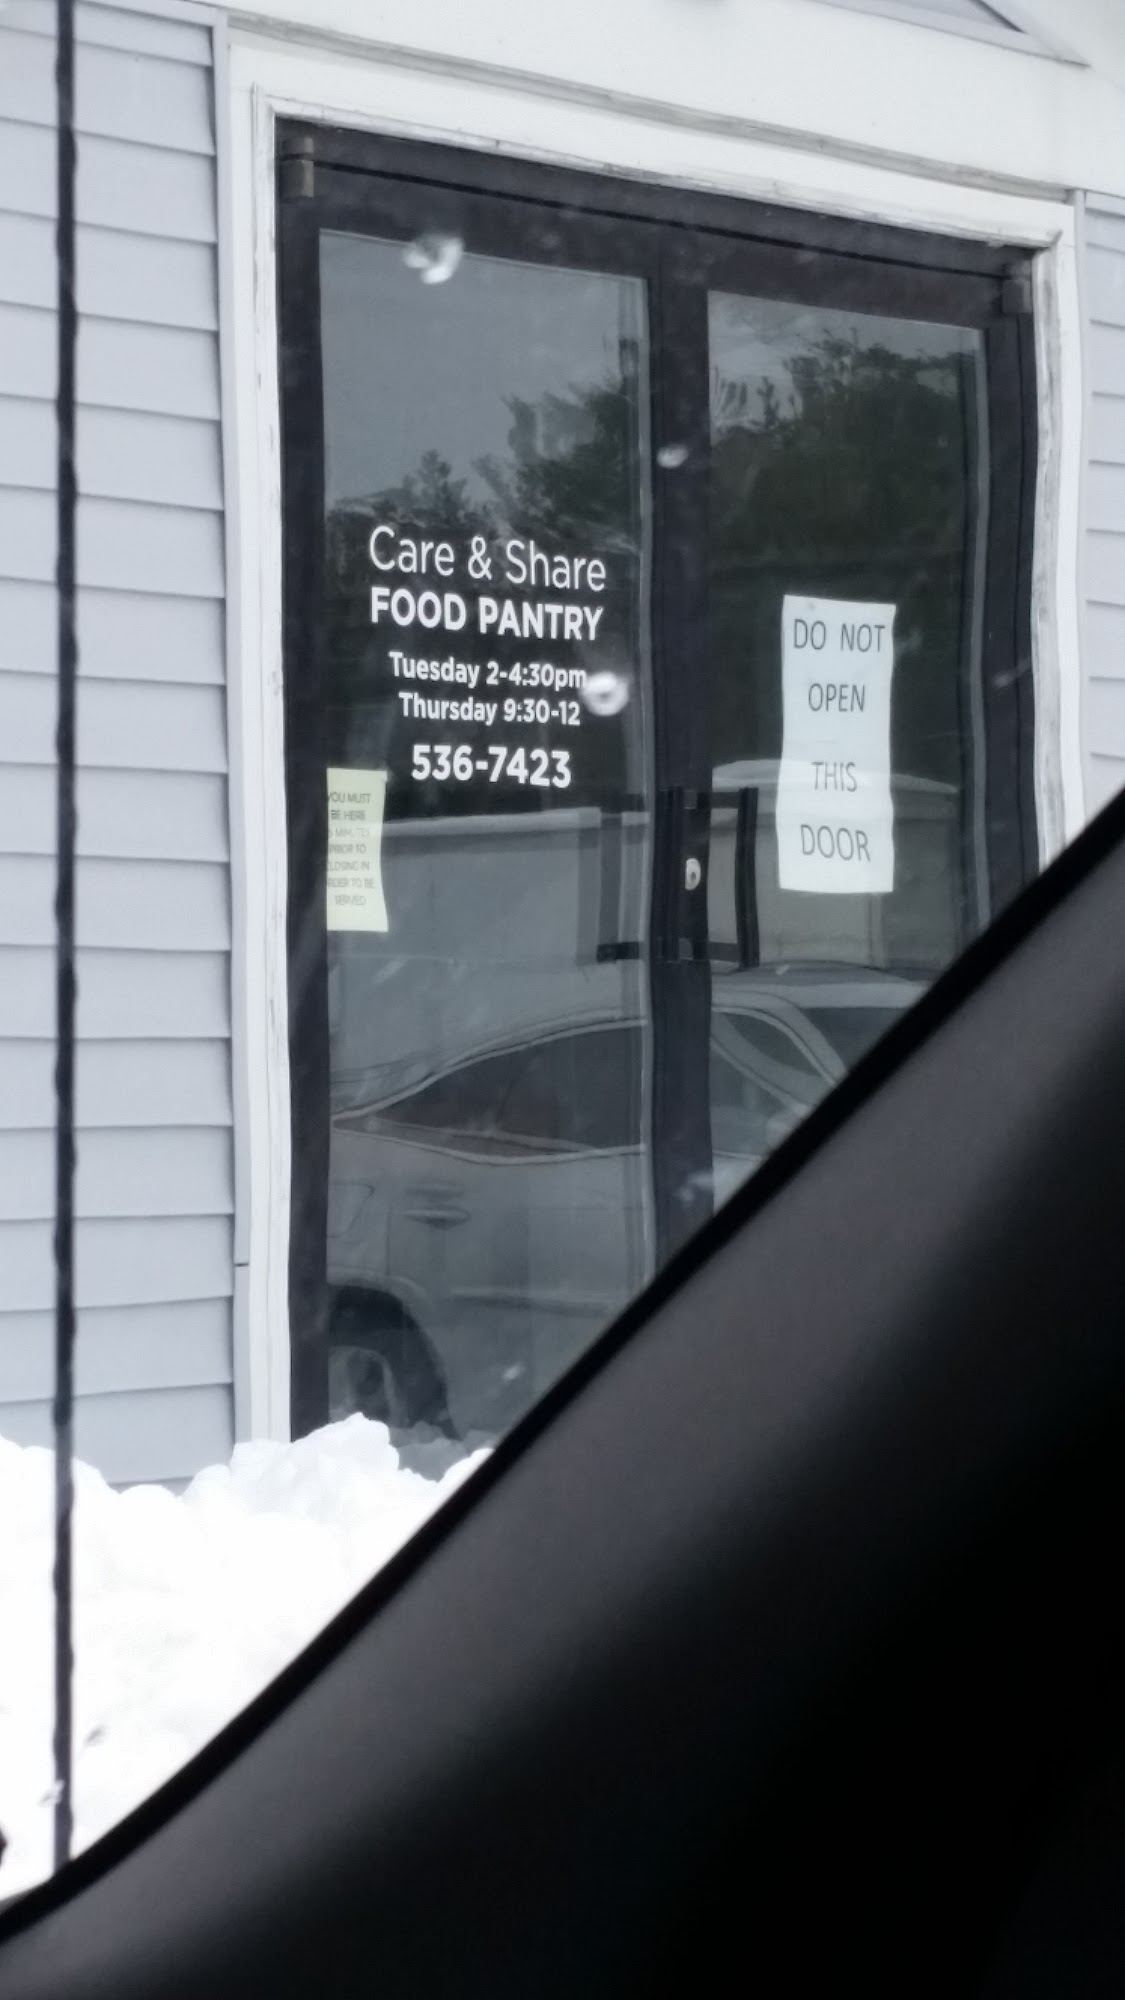 Care & Share Food Pantry